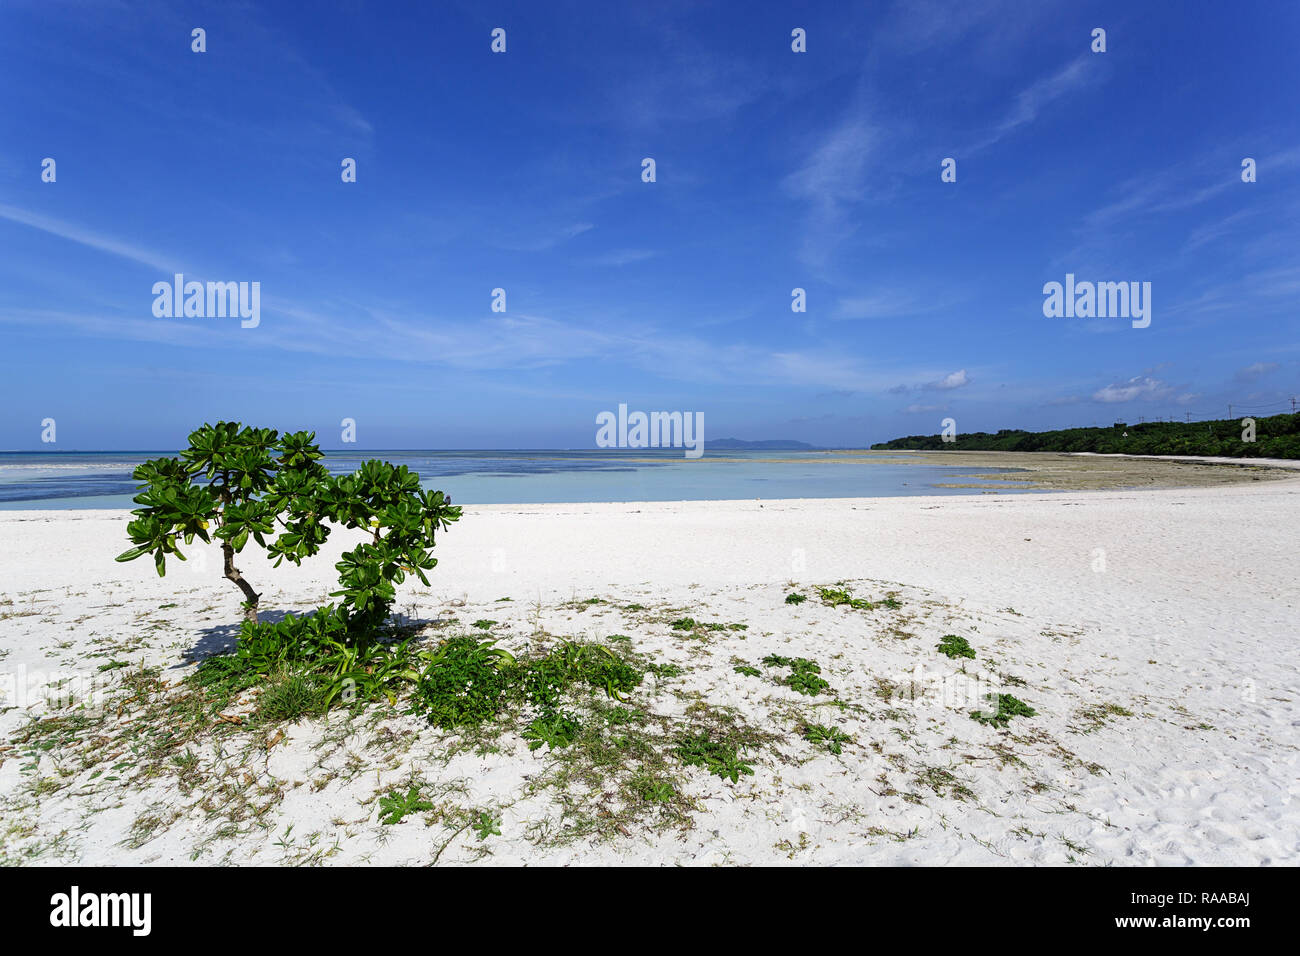 Lonely tree at spectacular white coral sand and clear turquoise waters on Kondoi Beach, Taketomi Island, Yaeyama Islands, Okinawa Prefecture, Japan Stock Photo